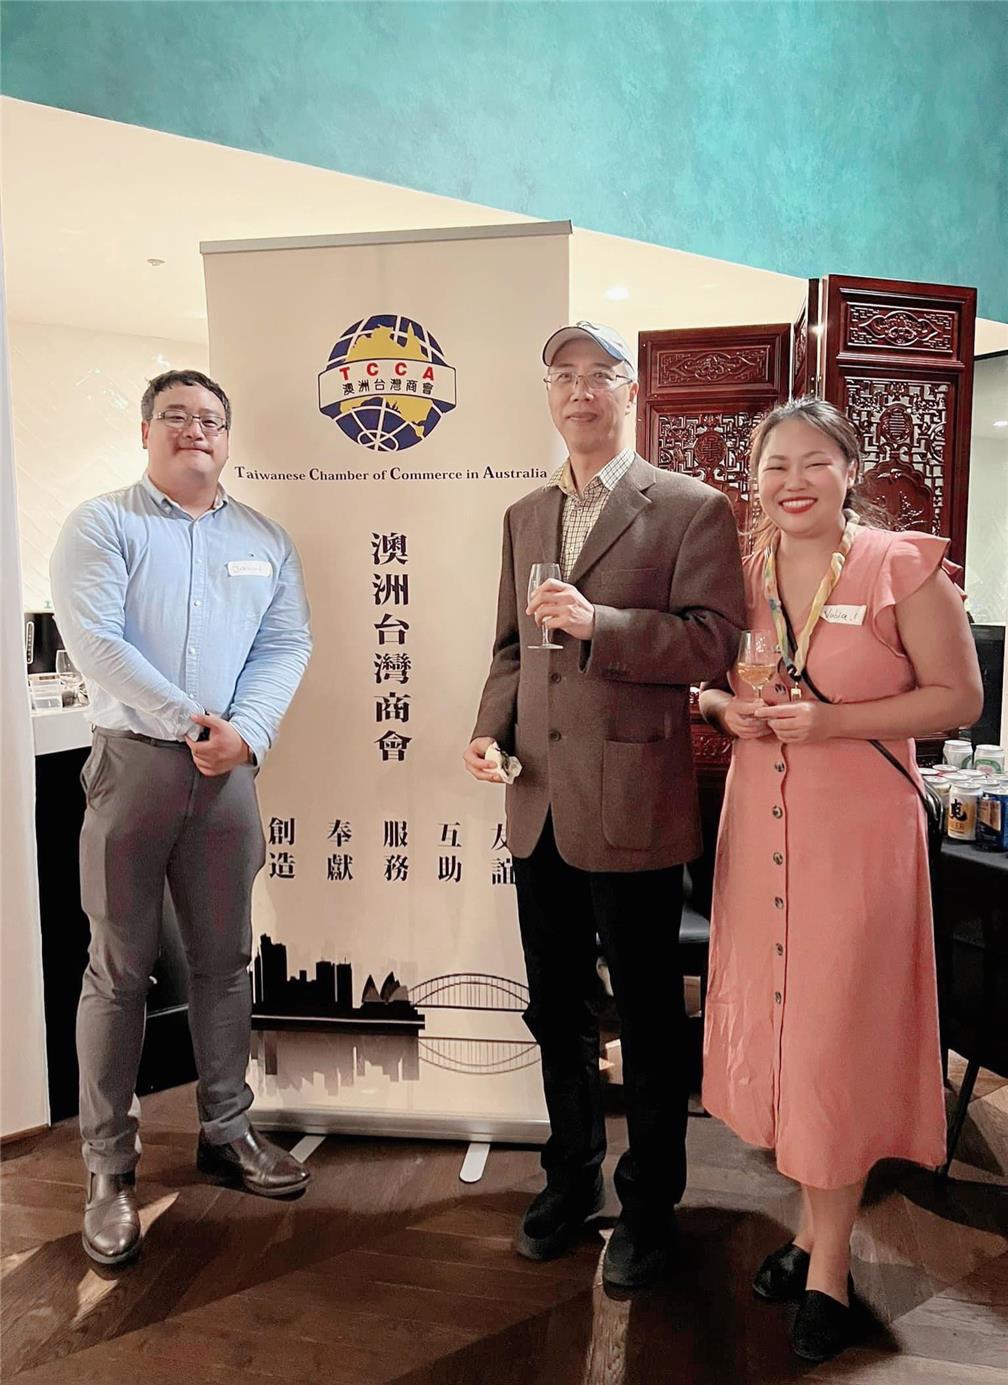 The Director of Culture Centre of TECO in Sydney, Gabriel Shih (center), attended the event to show his support.